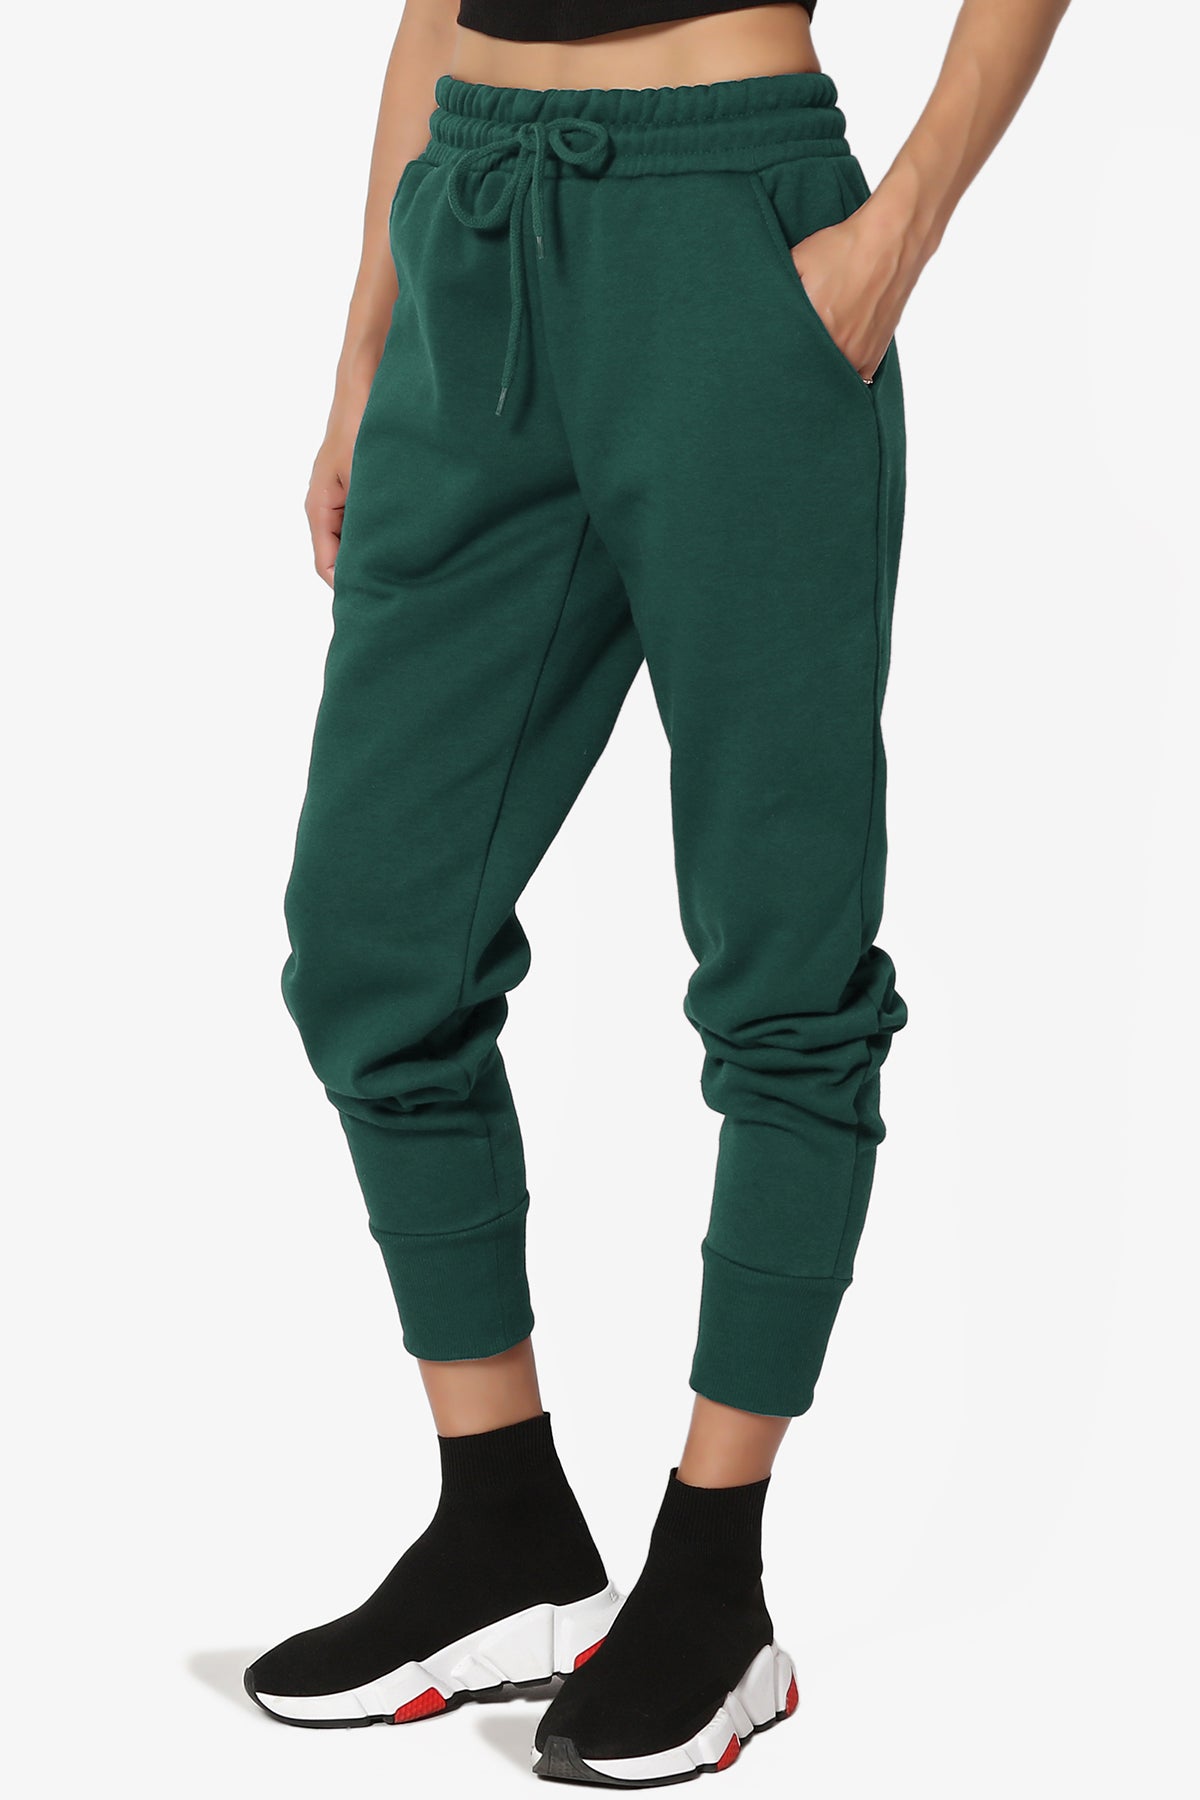 Sksloeg Women's Joggers Pants Cotton Joggers Pants with Pockets, Tie Side  Bottom Soft capris Sweatpants Running/sport Tall Jogging Track Pant,Green S  